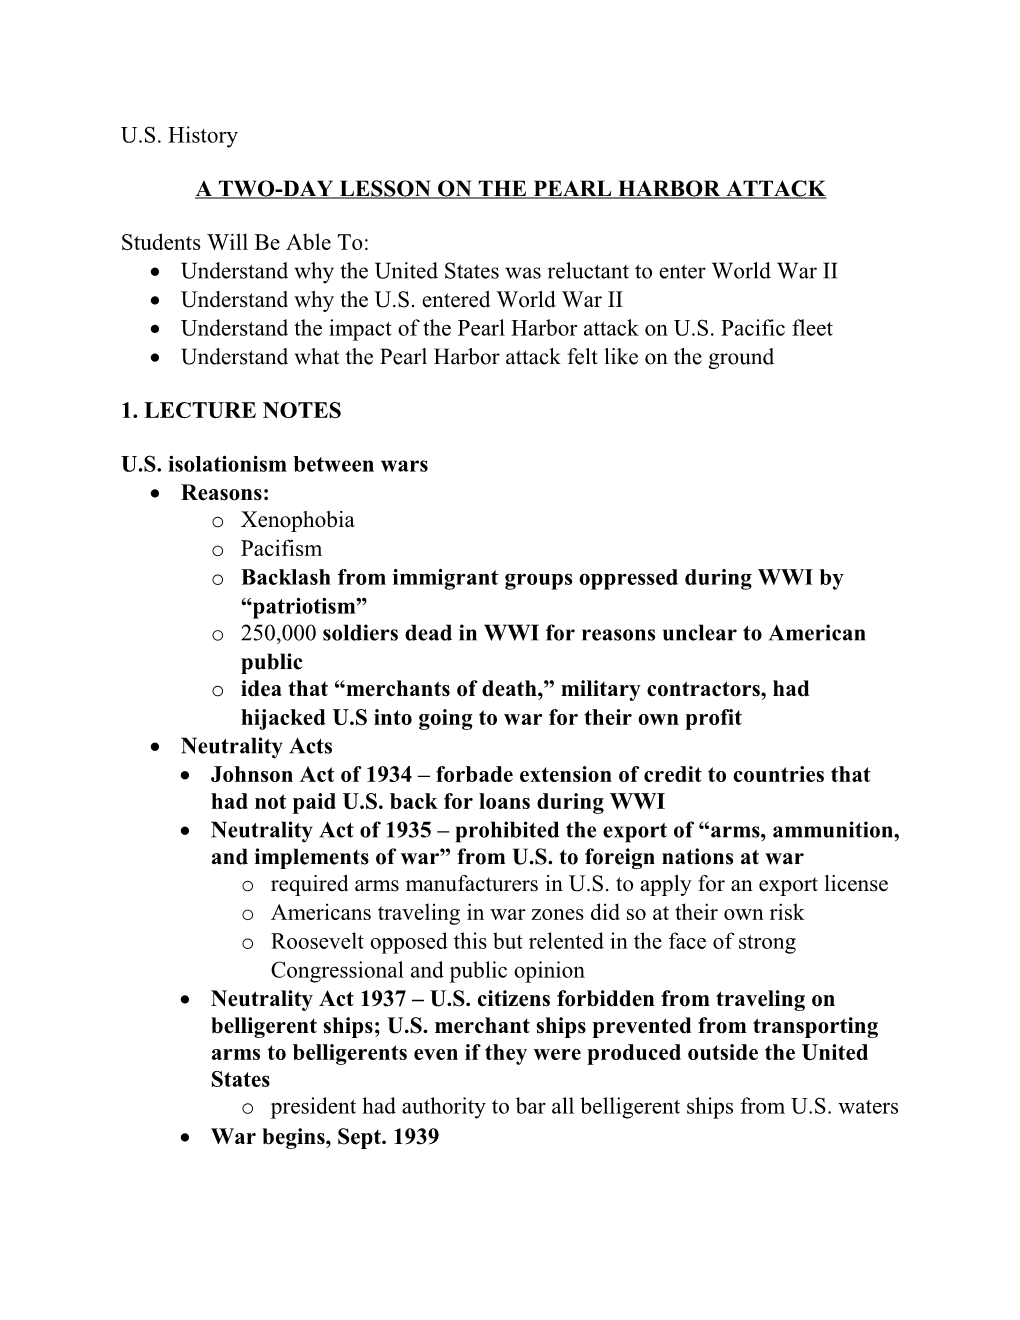 A Two-Day Lesson on the Pearl Harbor Attack